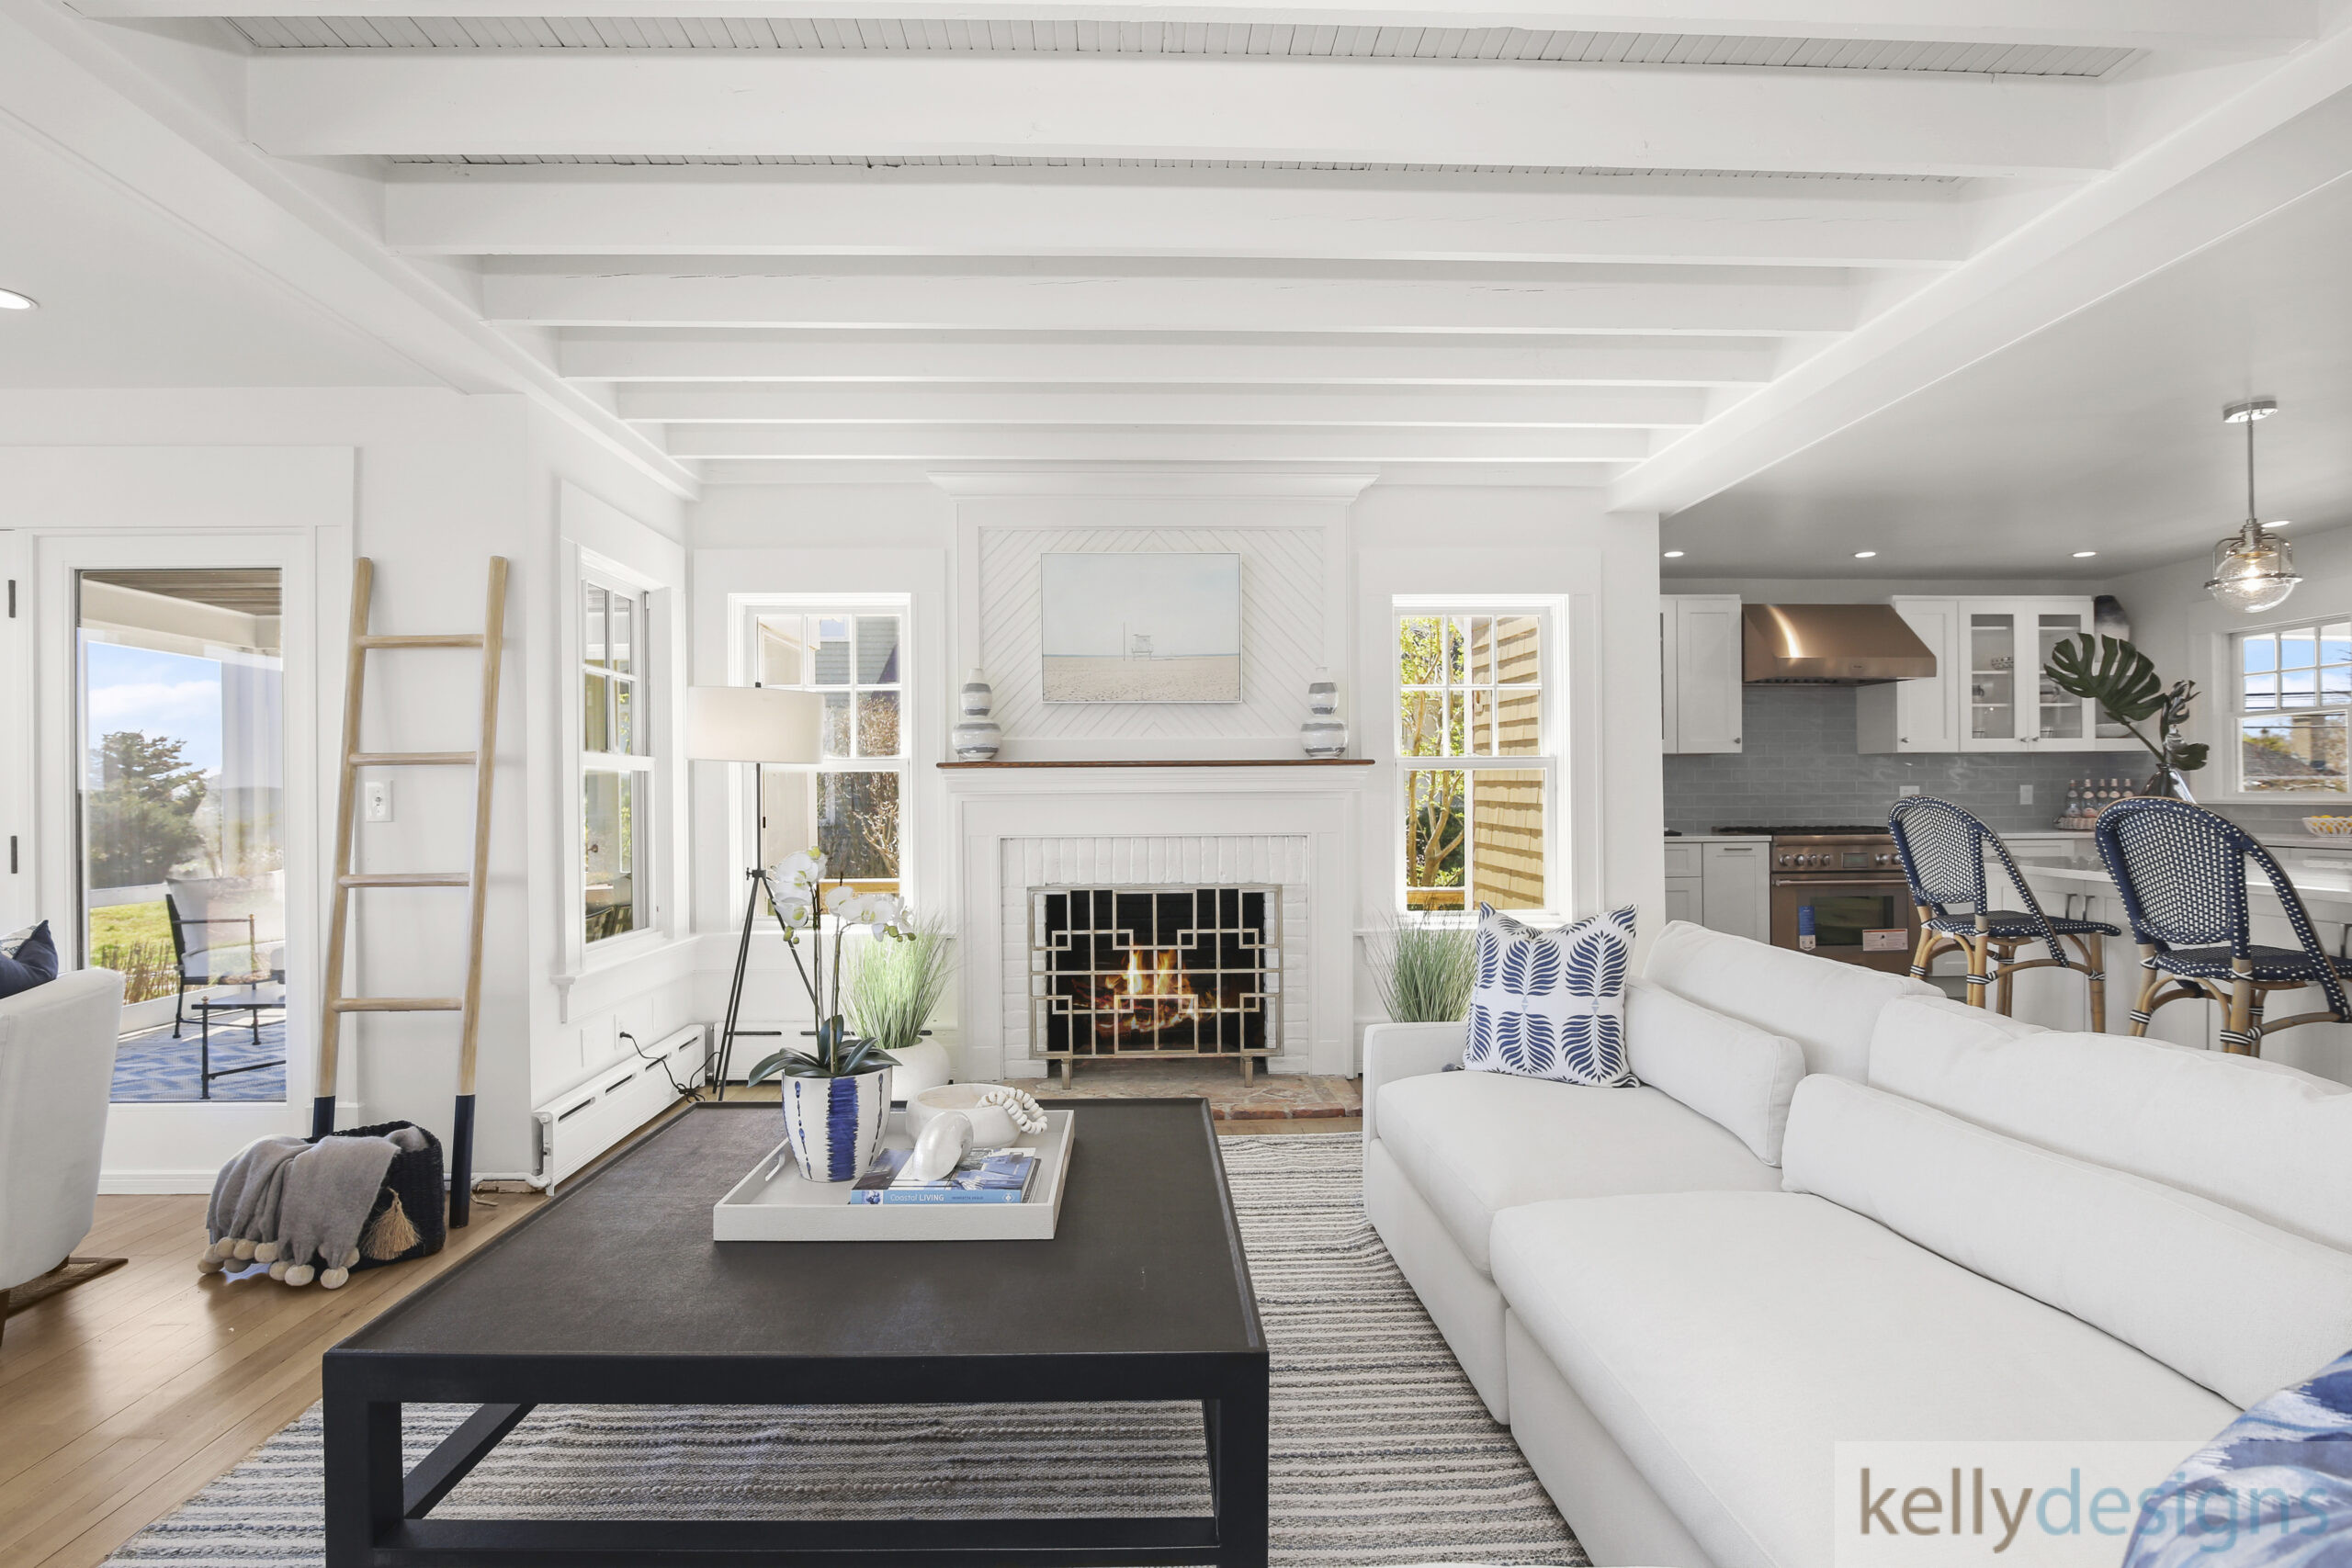 Home Staging By Kellydesigns  On Fairfield Beach Road